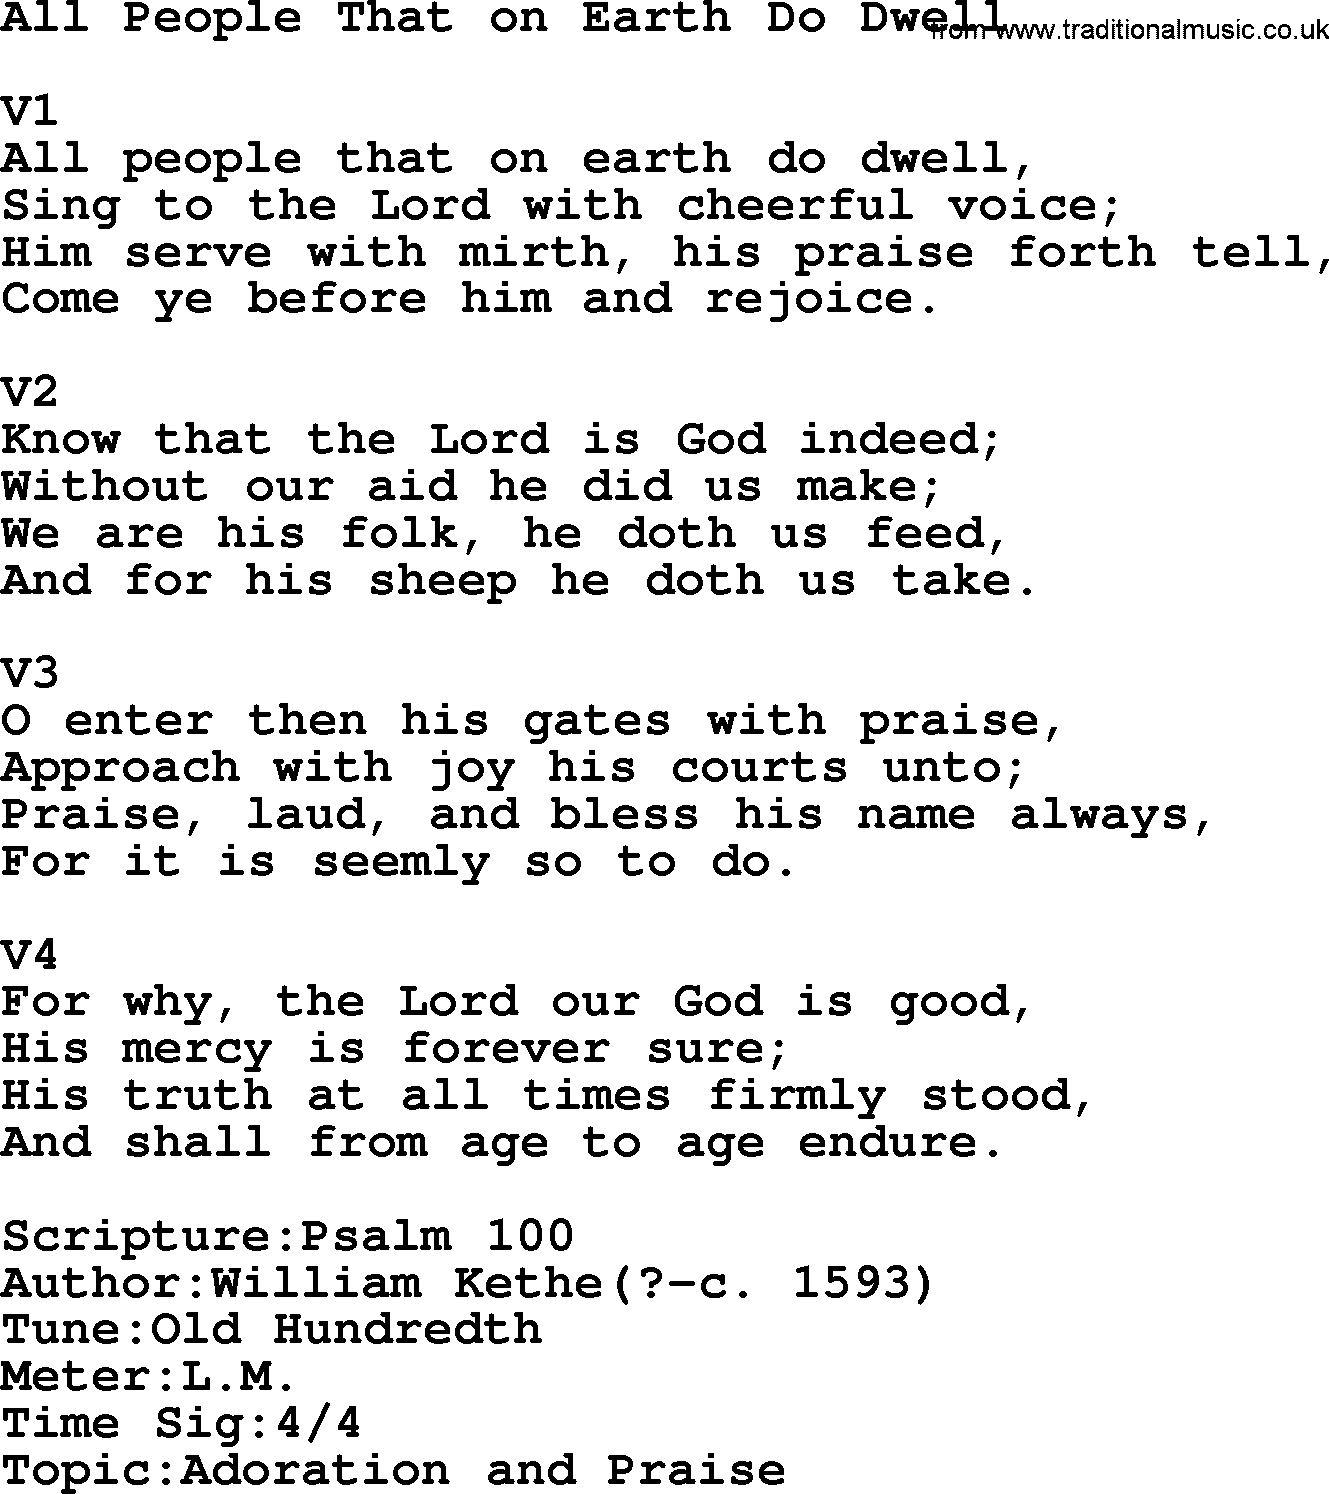 Adventist Hynms collection, Hymn: All People That On Earth Do Dwell, lyrics with PDF